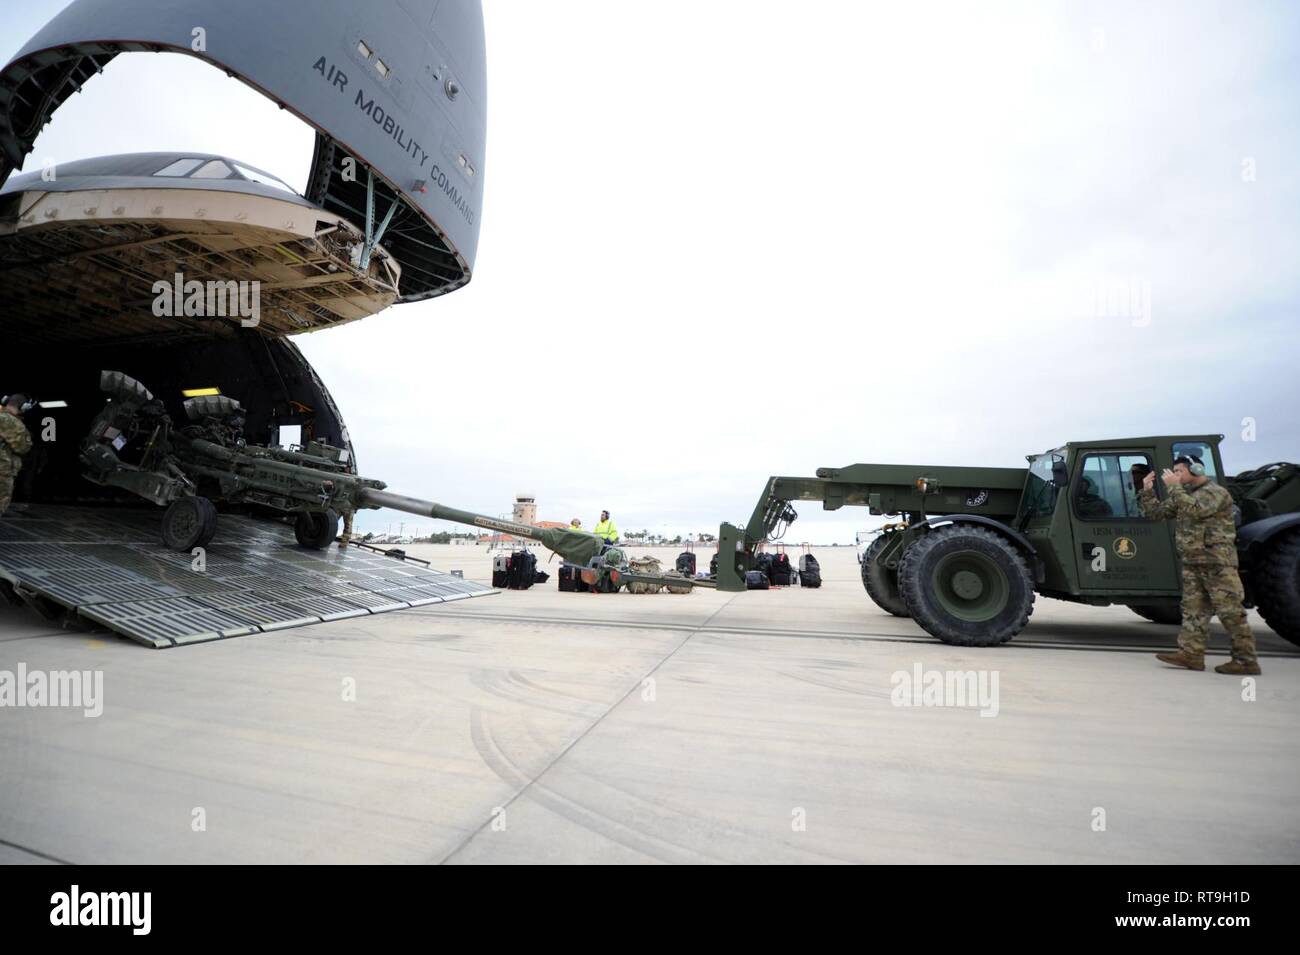 NAVAL STATION ROTA, Spain (Jan. 29, 2019) Seabees assigned to Naval Mobile Construction Battalion (NMCB) 1 and U.S. Air Force (USAF) airmen assigned to the 22nd Airlift Squadron download U.S. Army M777 howitzers from a USAF C5M Super Galaxy during an embarkation operation. NMCB-1 is forward deployed to execute construction, humanitarian and foreign assistance, and theater security cooperation in the U.S. 6th Fleet area of operations. Stock Photo